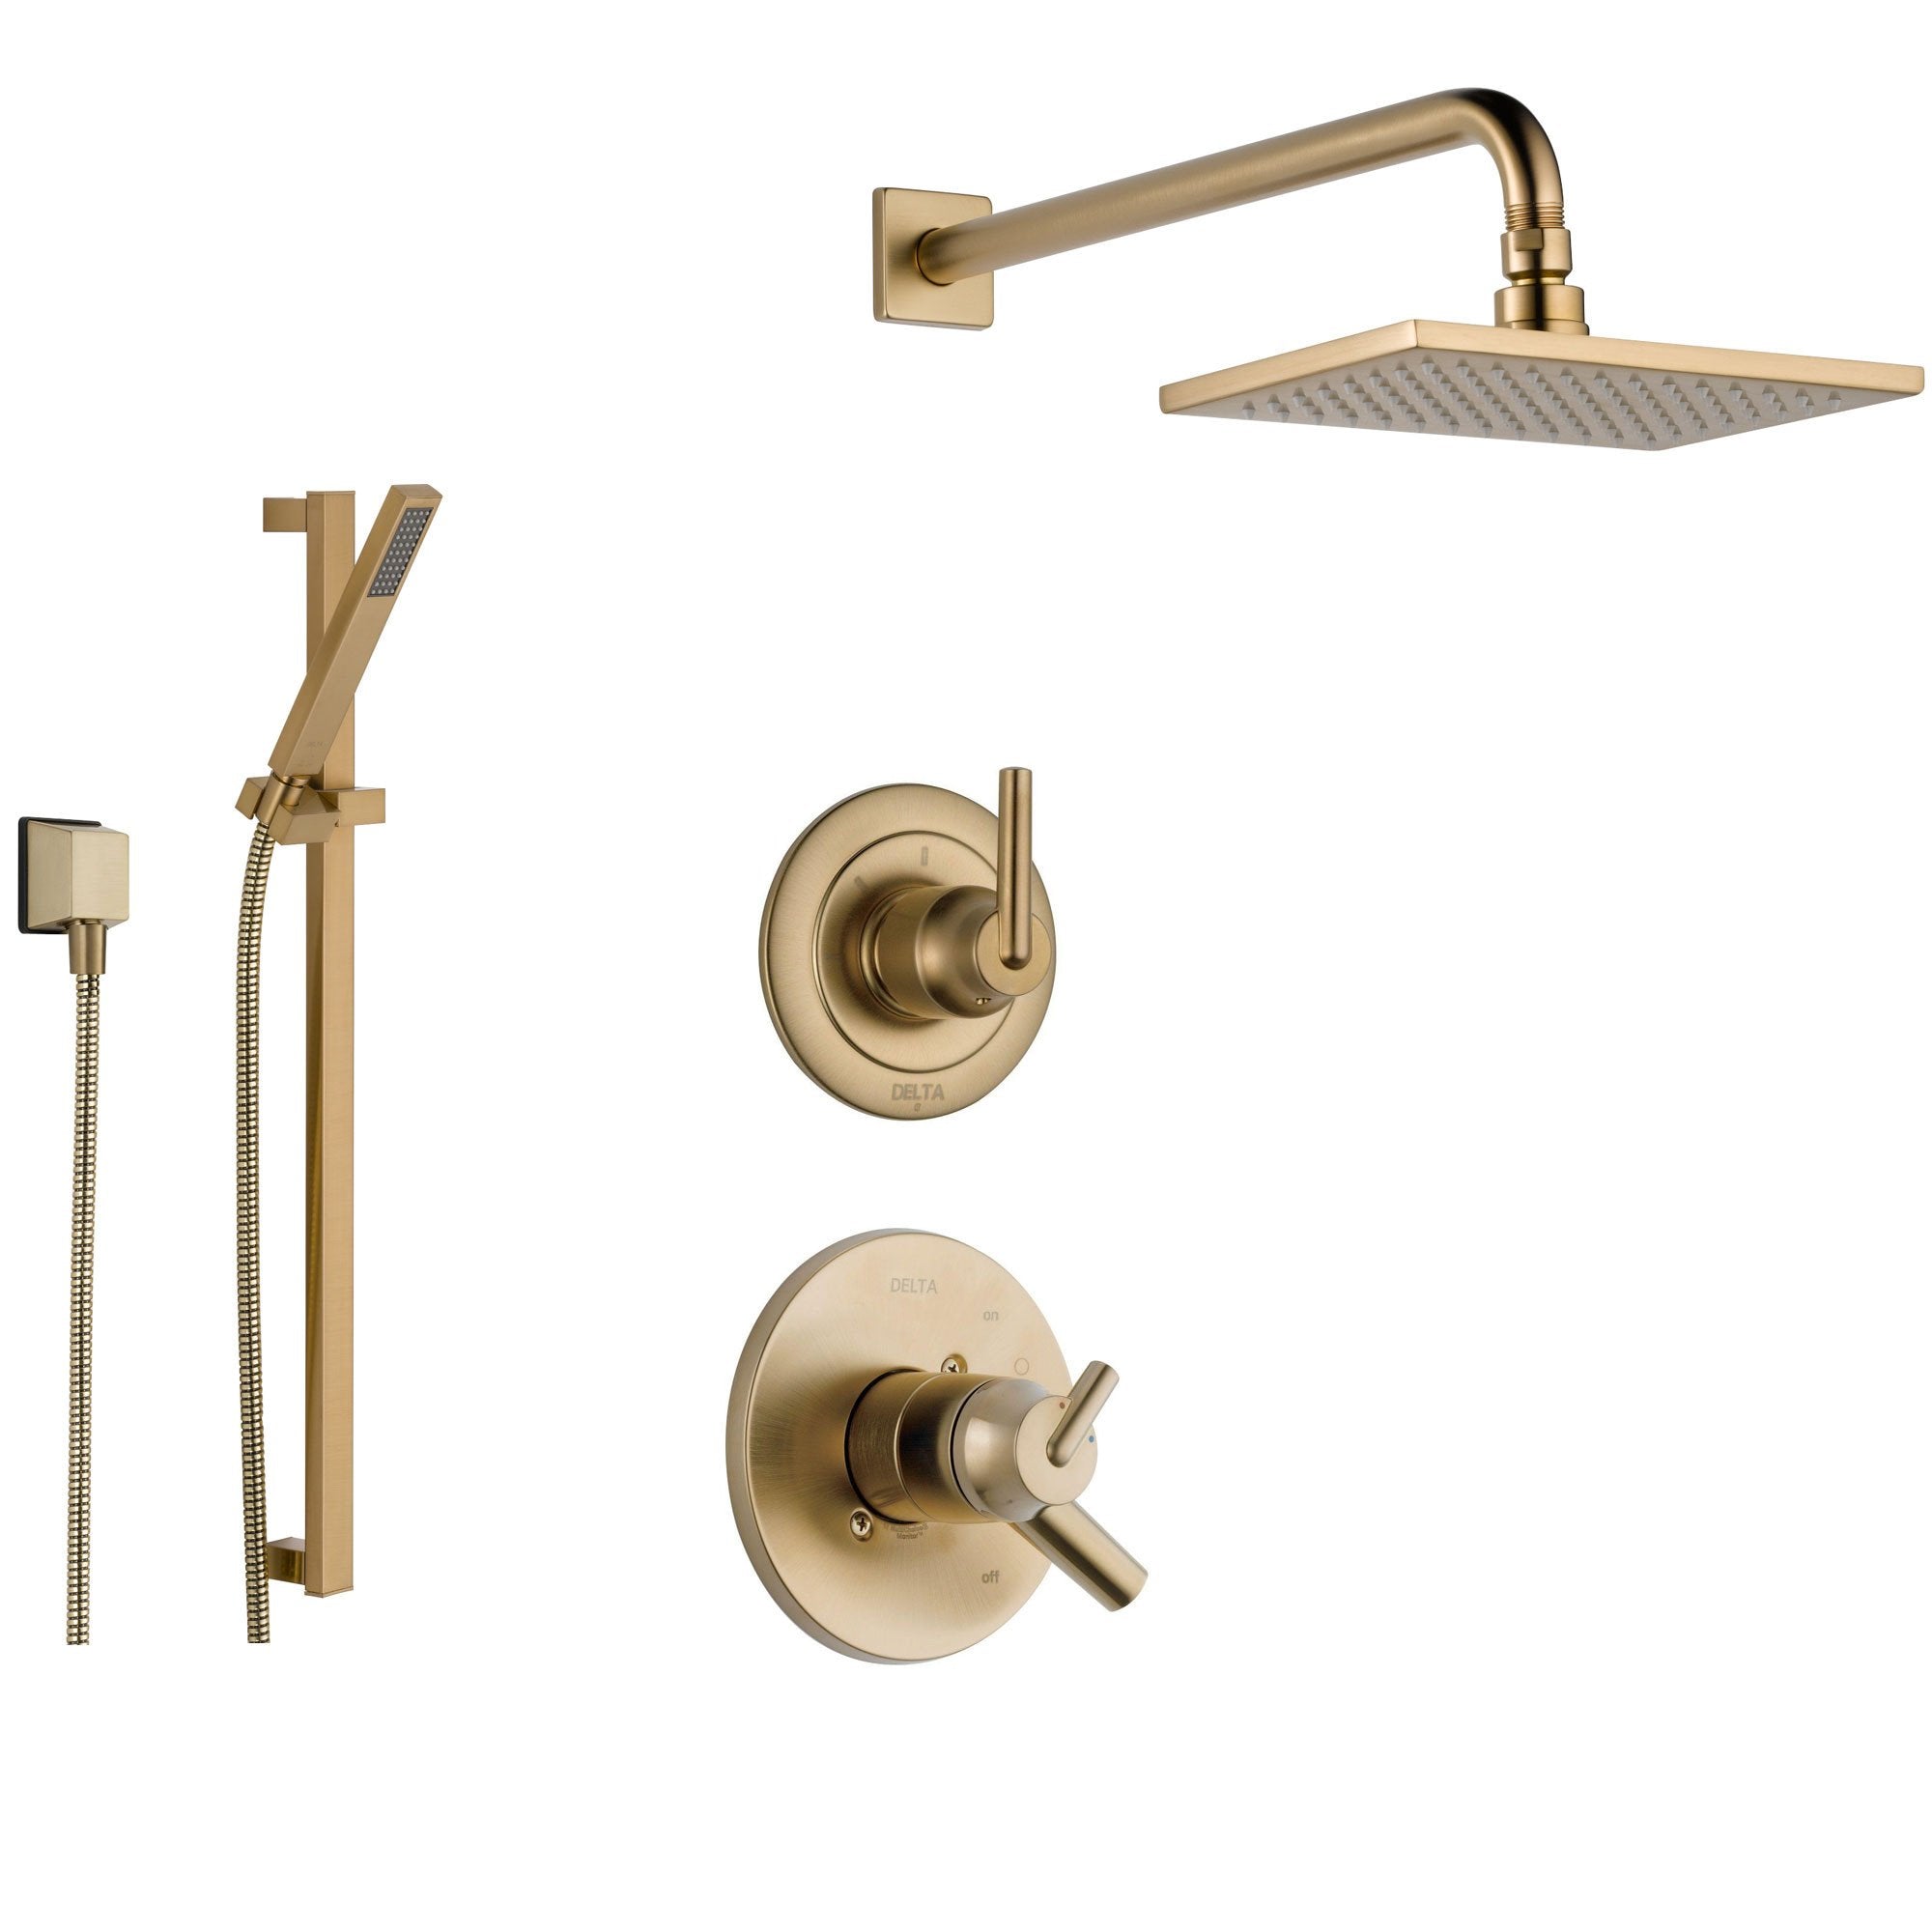 Delta Trinsic Champagne Bronze Shower System with Dual Control Shower Handle, 3-setting Diverter, Large Modern Square Rain Showerhead, and Hand Shower Spray SS175985CZ